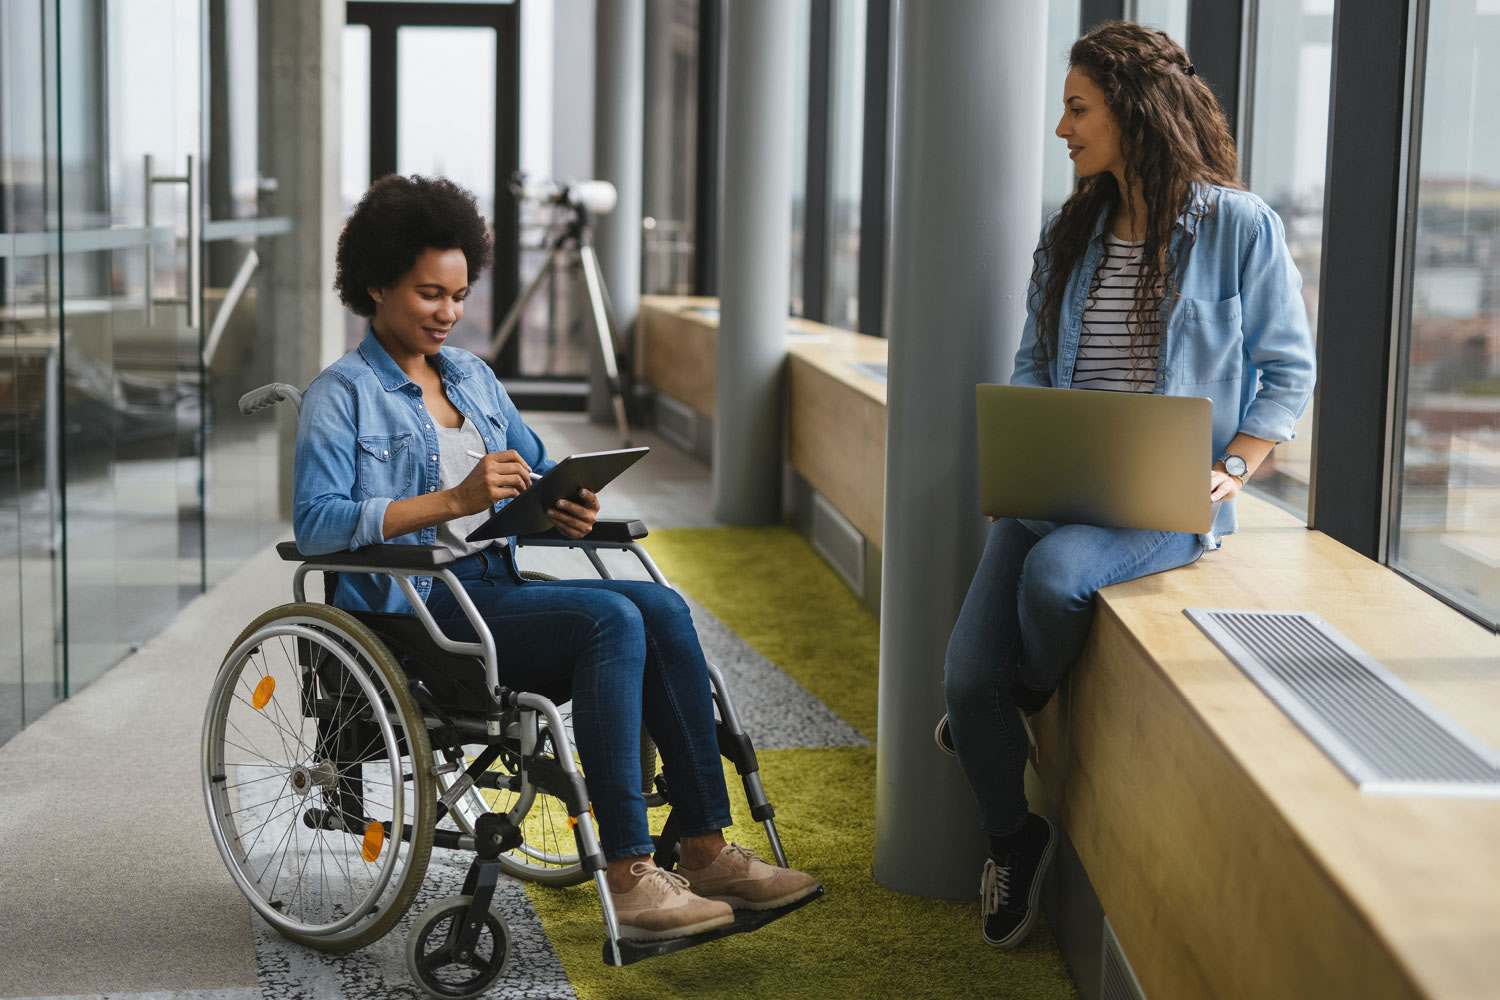 Woman in a wheelchair uses a tablet as another woman uses a laptop